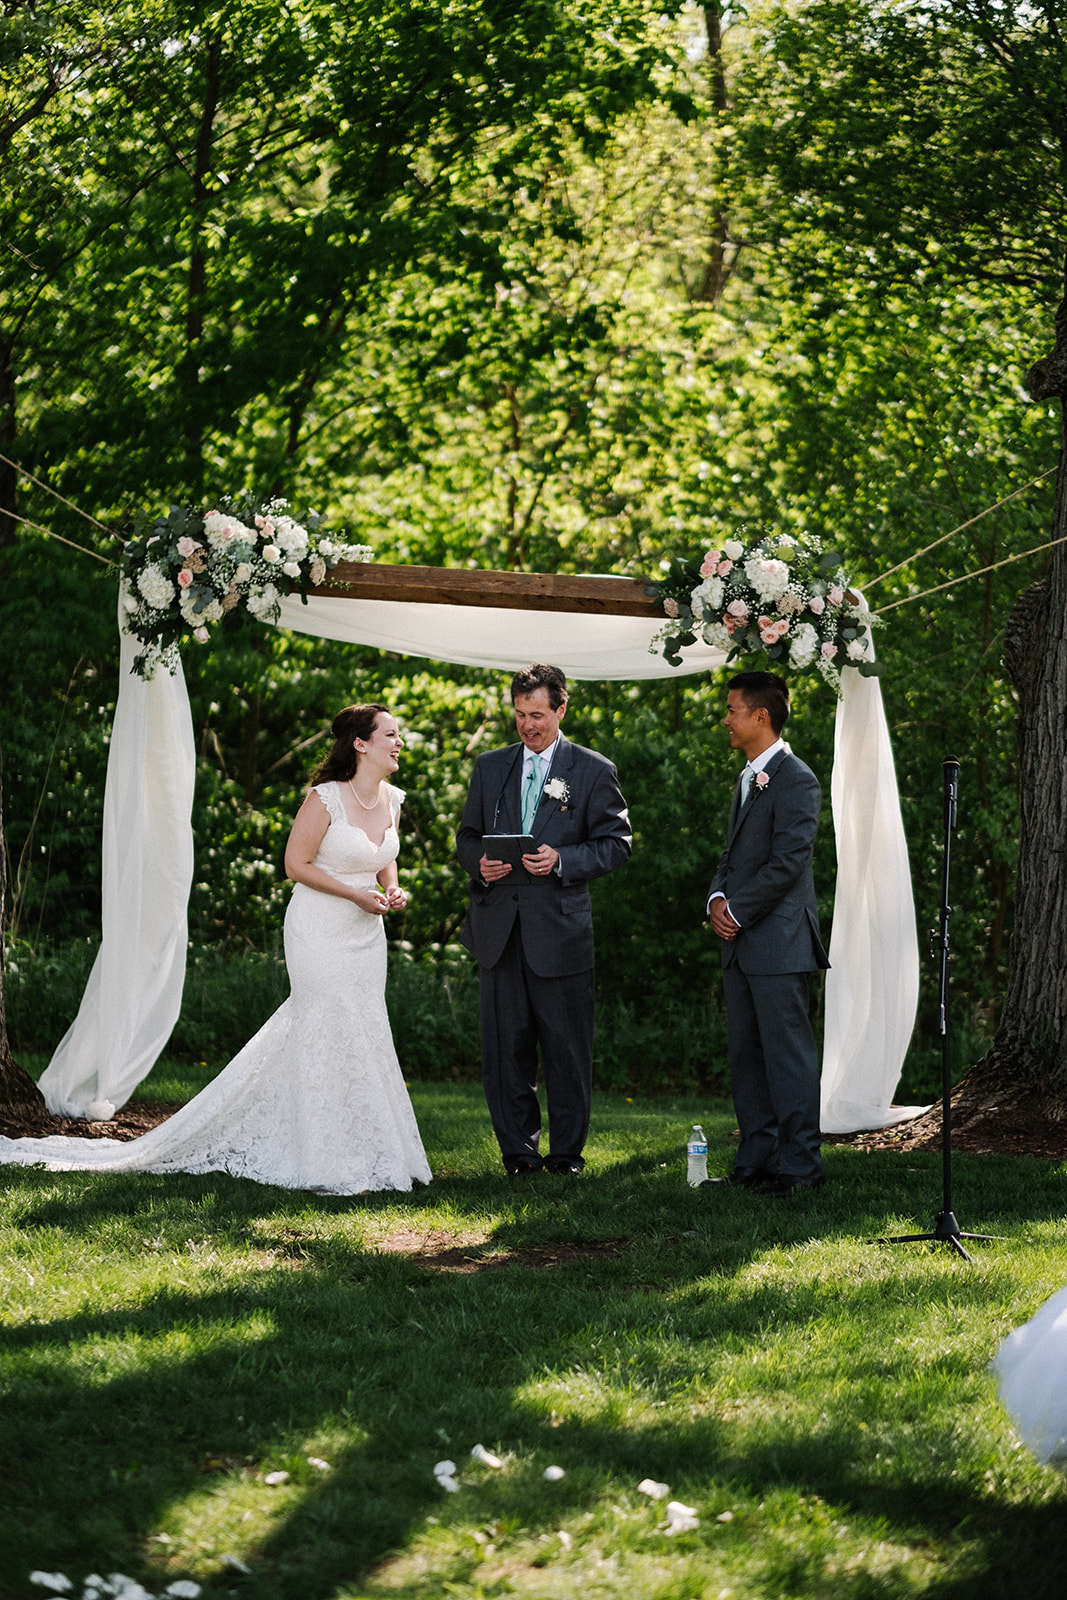 small wedding venues in chicago options outdoor ceremony